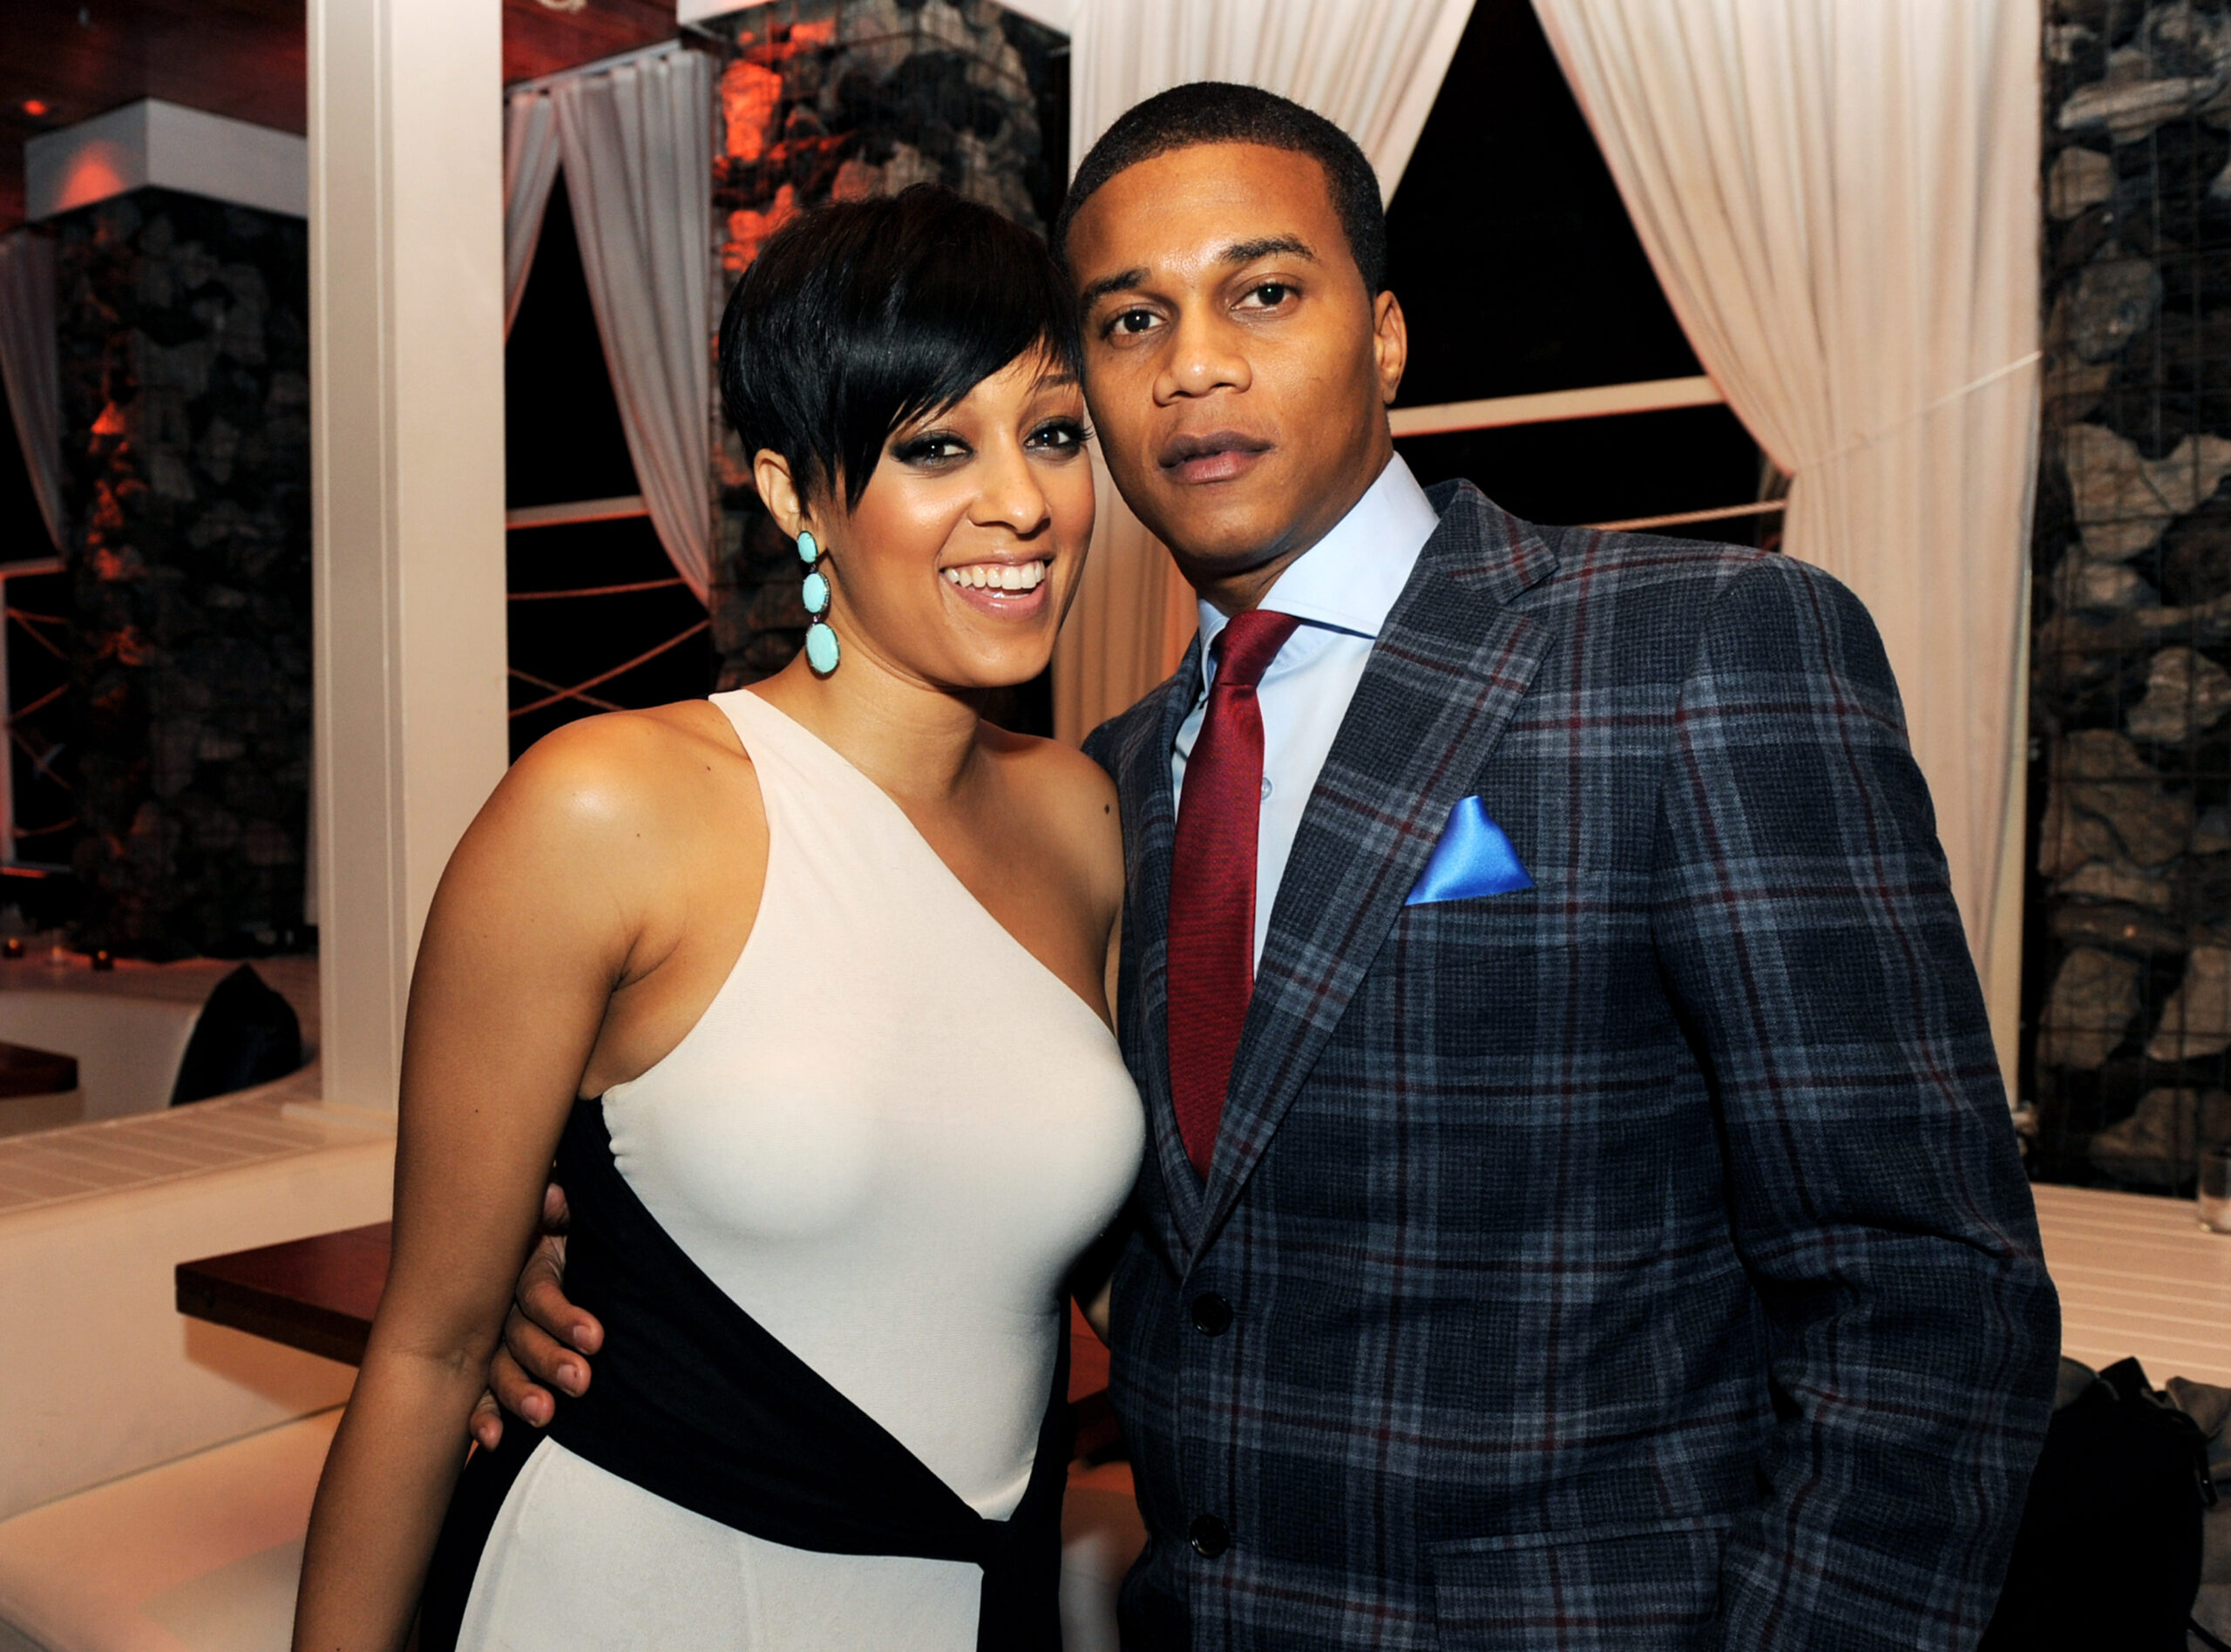 Tia Mowry Credits ‘Self-Love’ As Reason for Filing For Divorce From Cory Hardrict